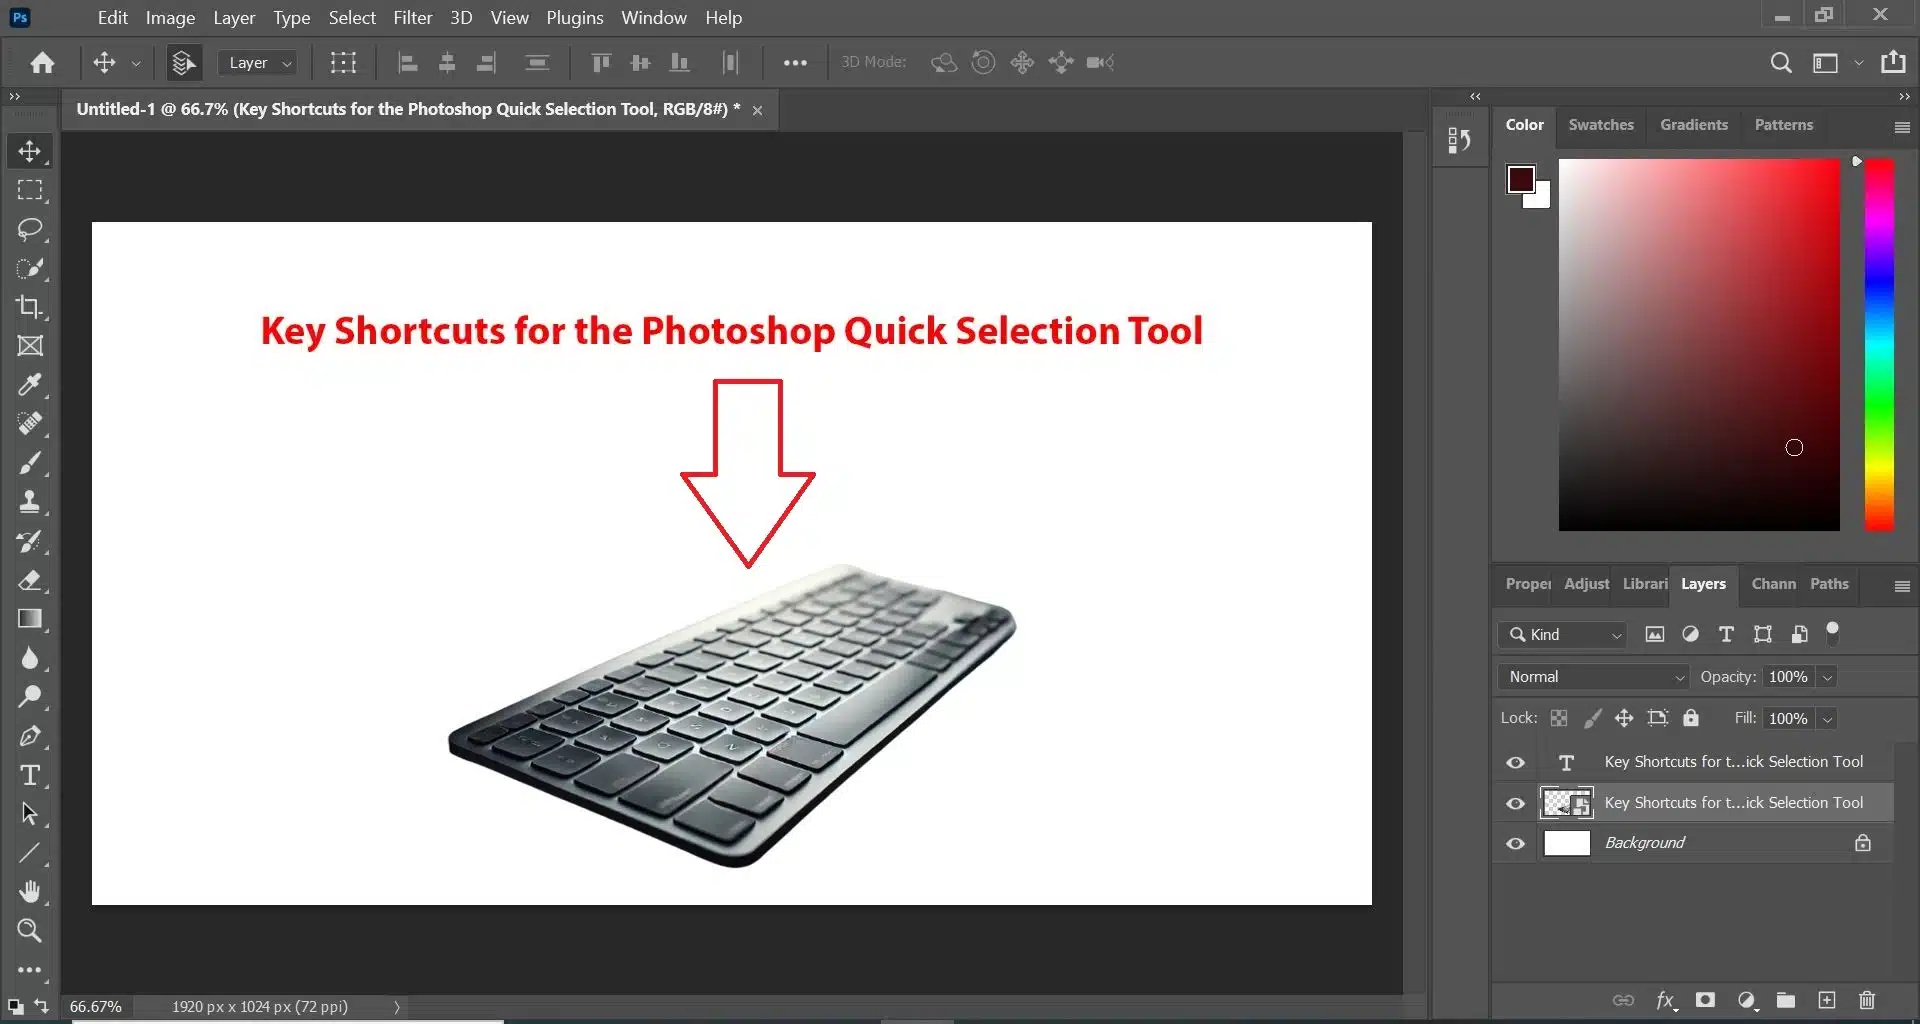 A screenshot of the Photoshop interface showing key shortcuts for the Quick Selection Tool, with a modern keyboard and a red arrow pointing to it.